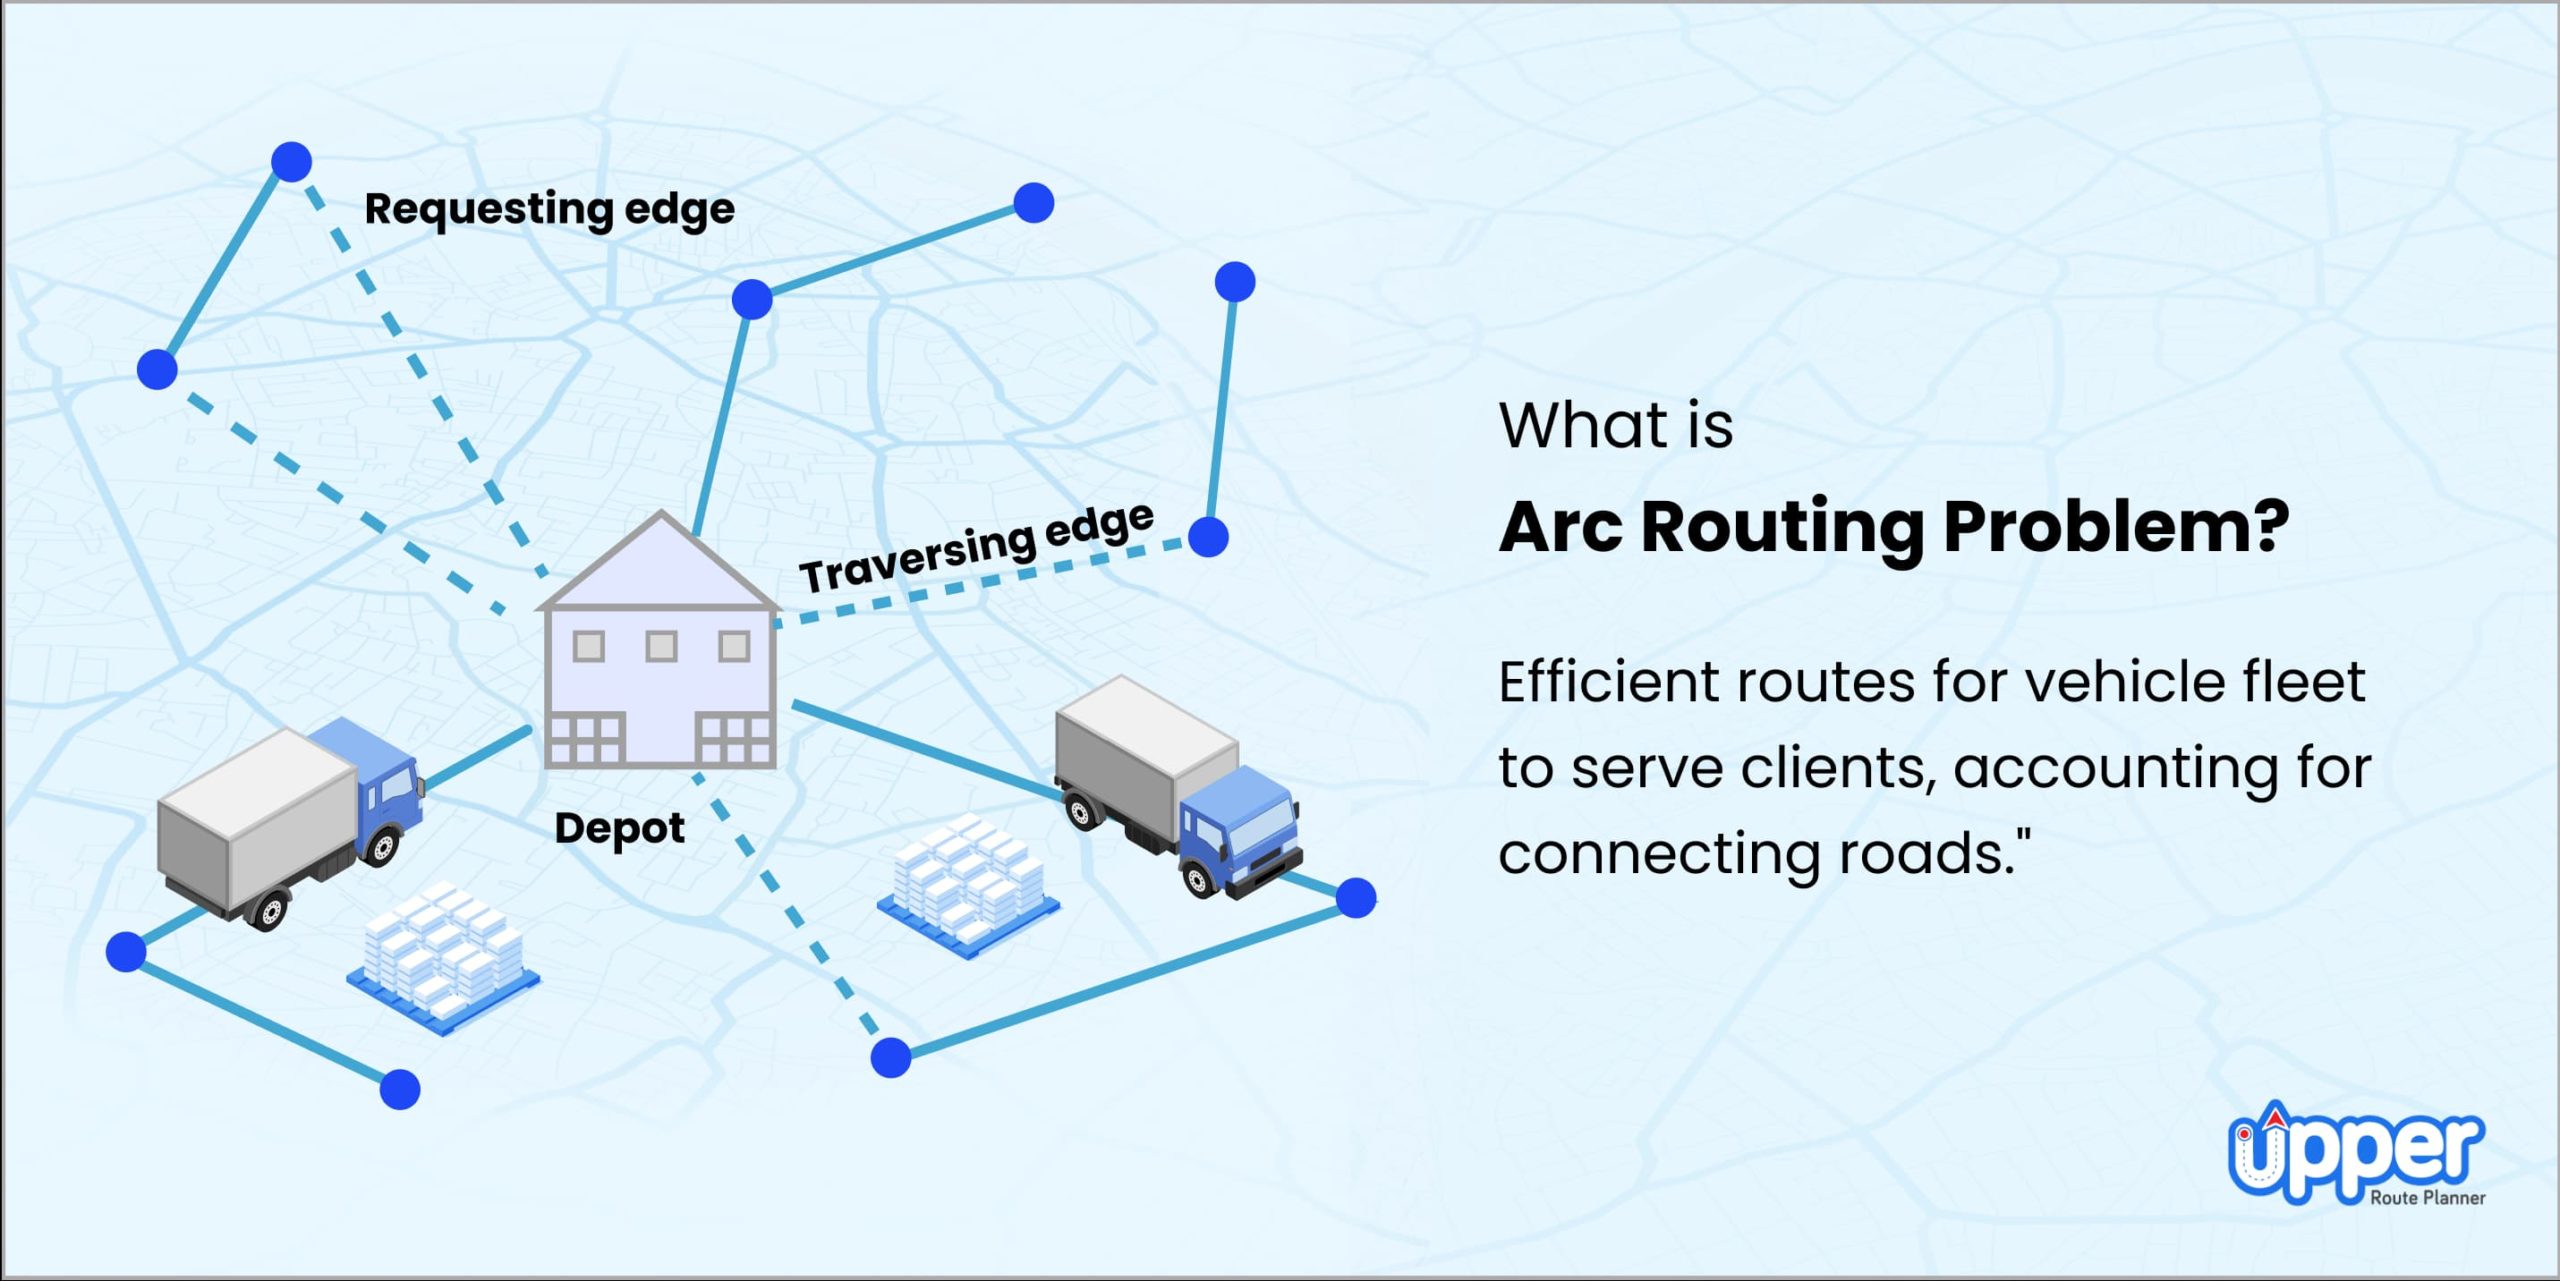 What is arc routing problem